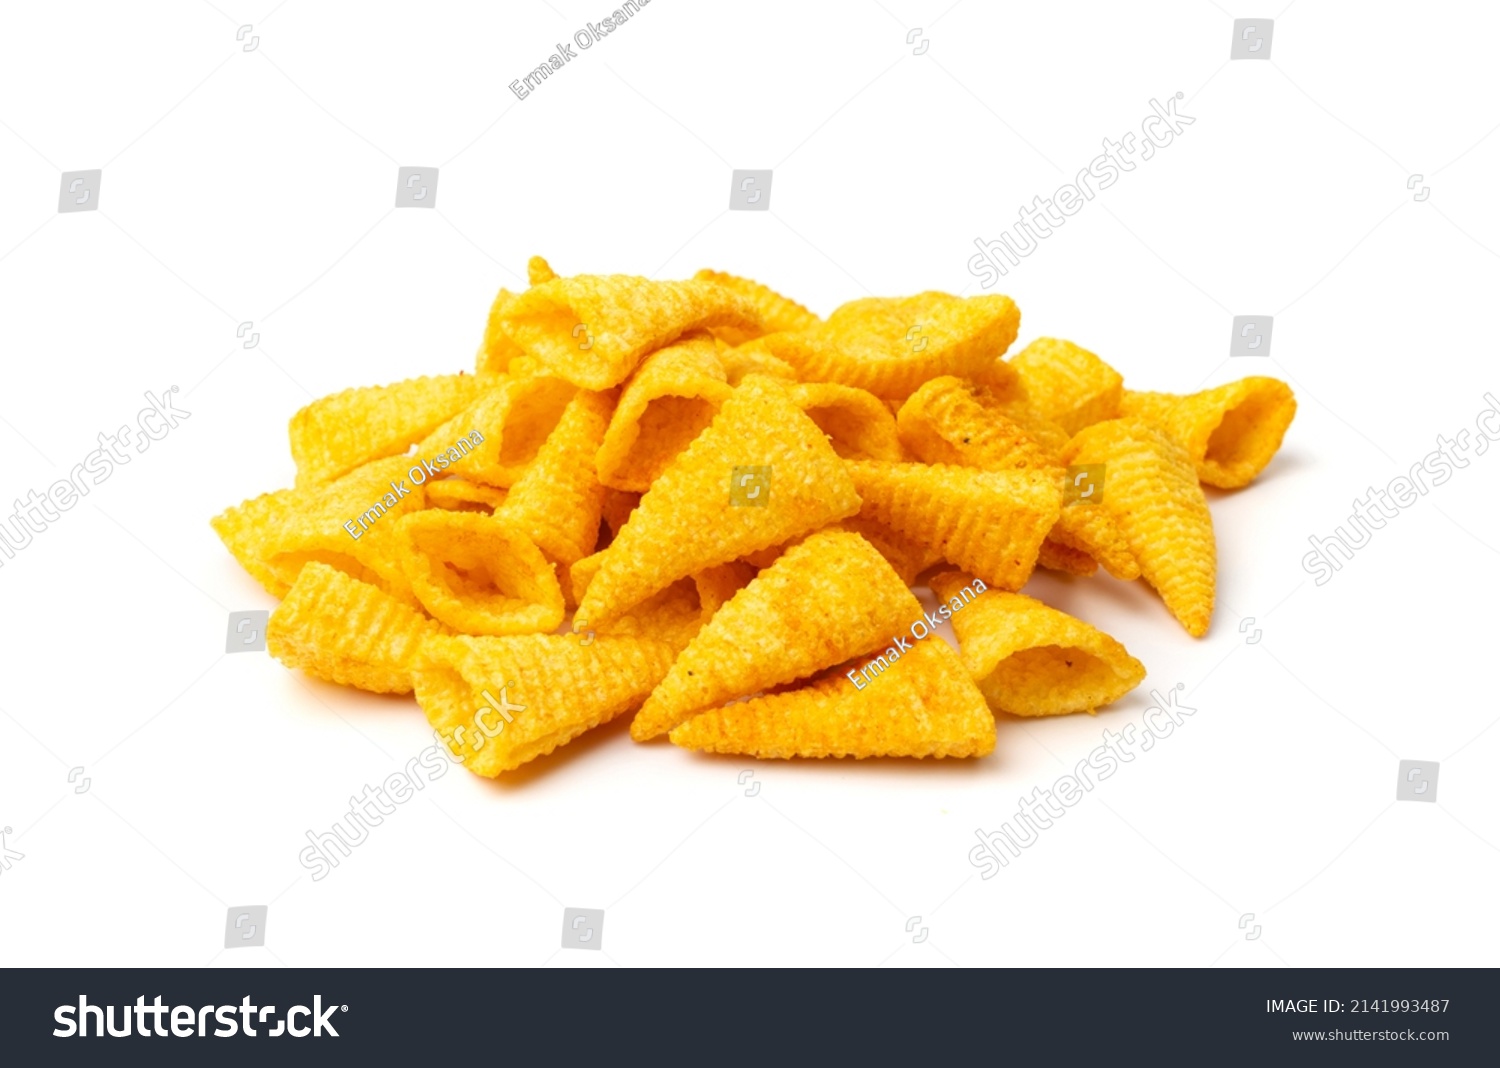 Corn cone pile isolated. Bugles chips, puffs with spices, crunchy puffed snacks, salty corn cones #2141993487